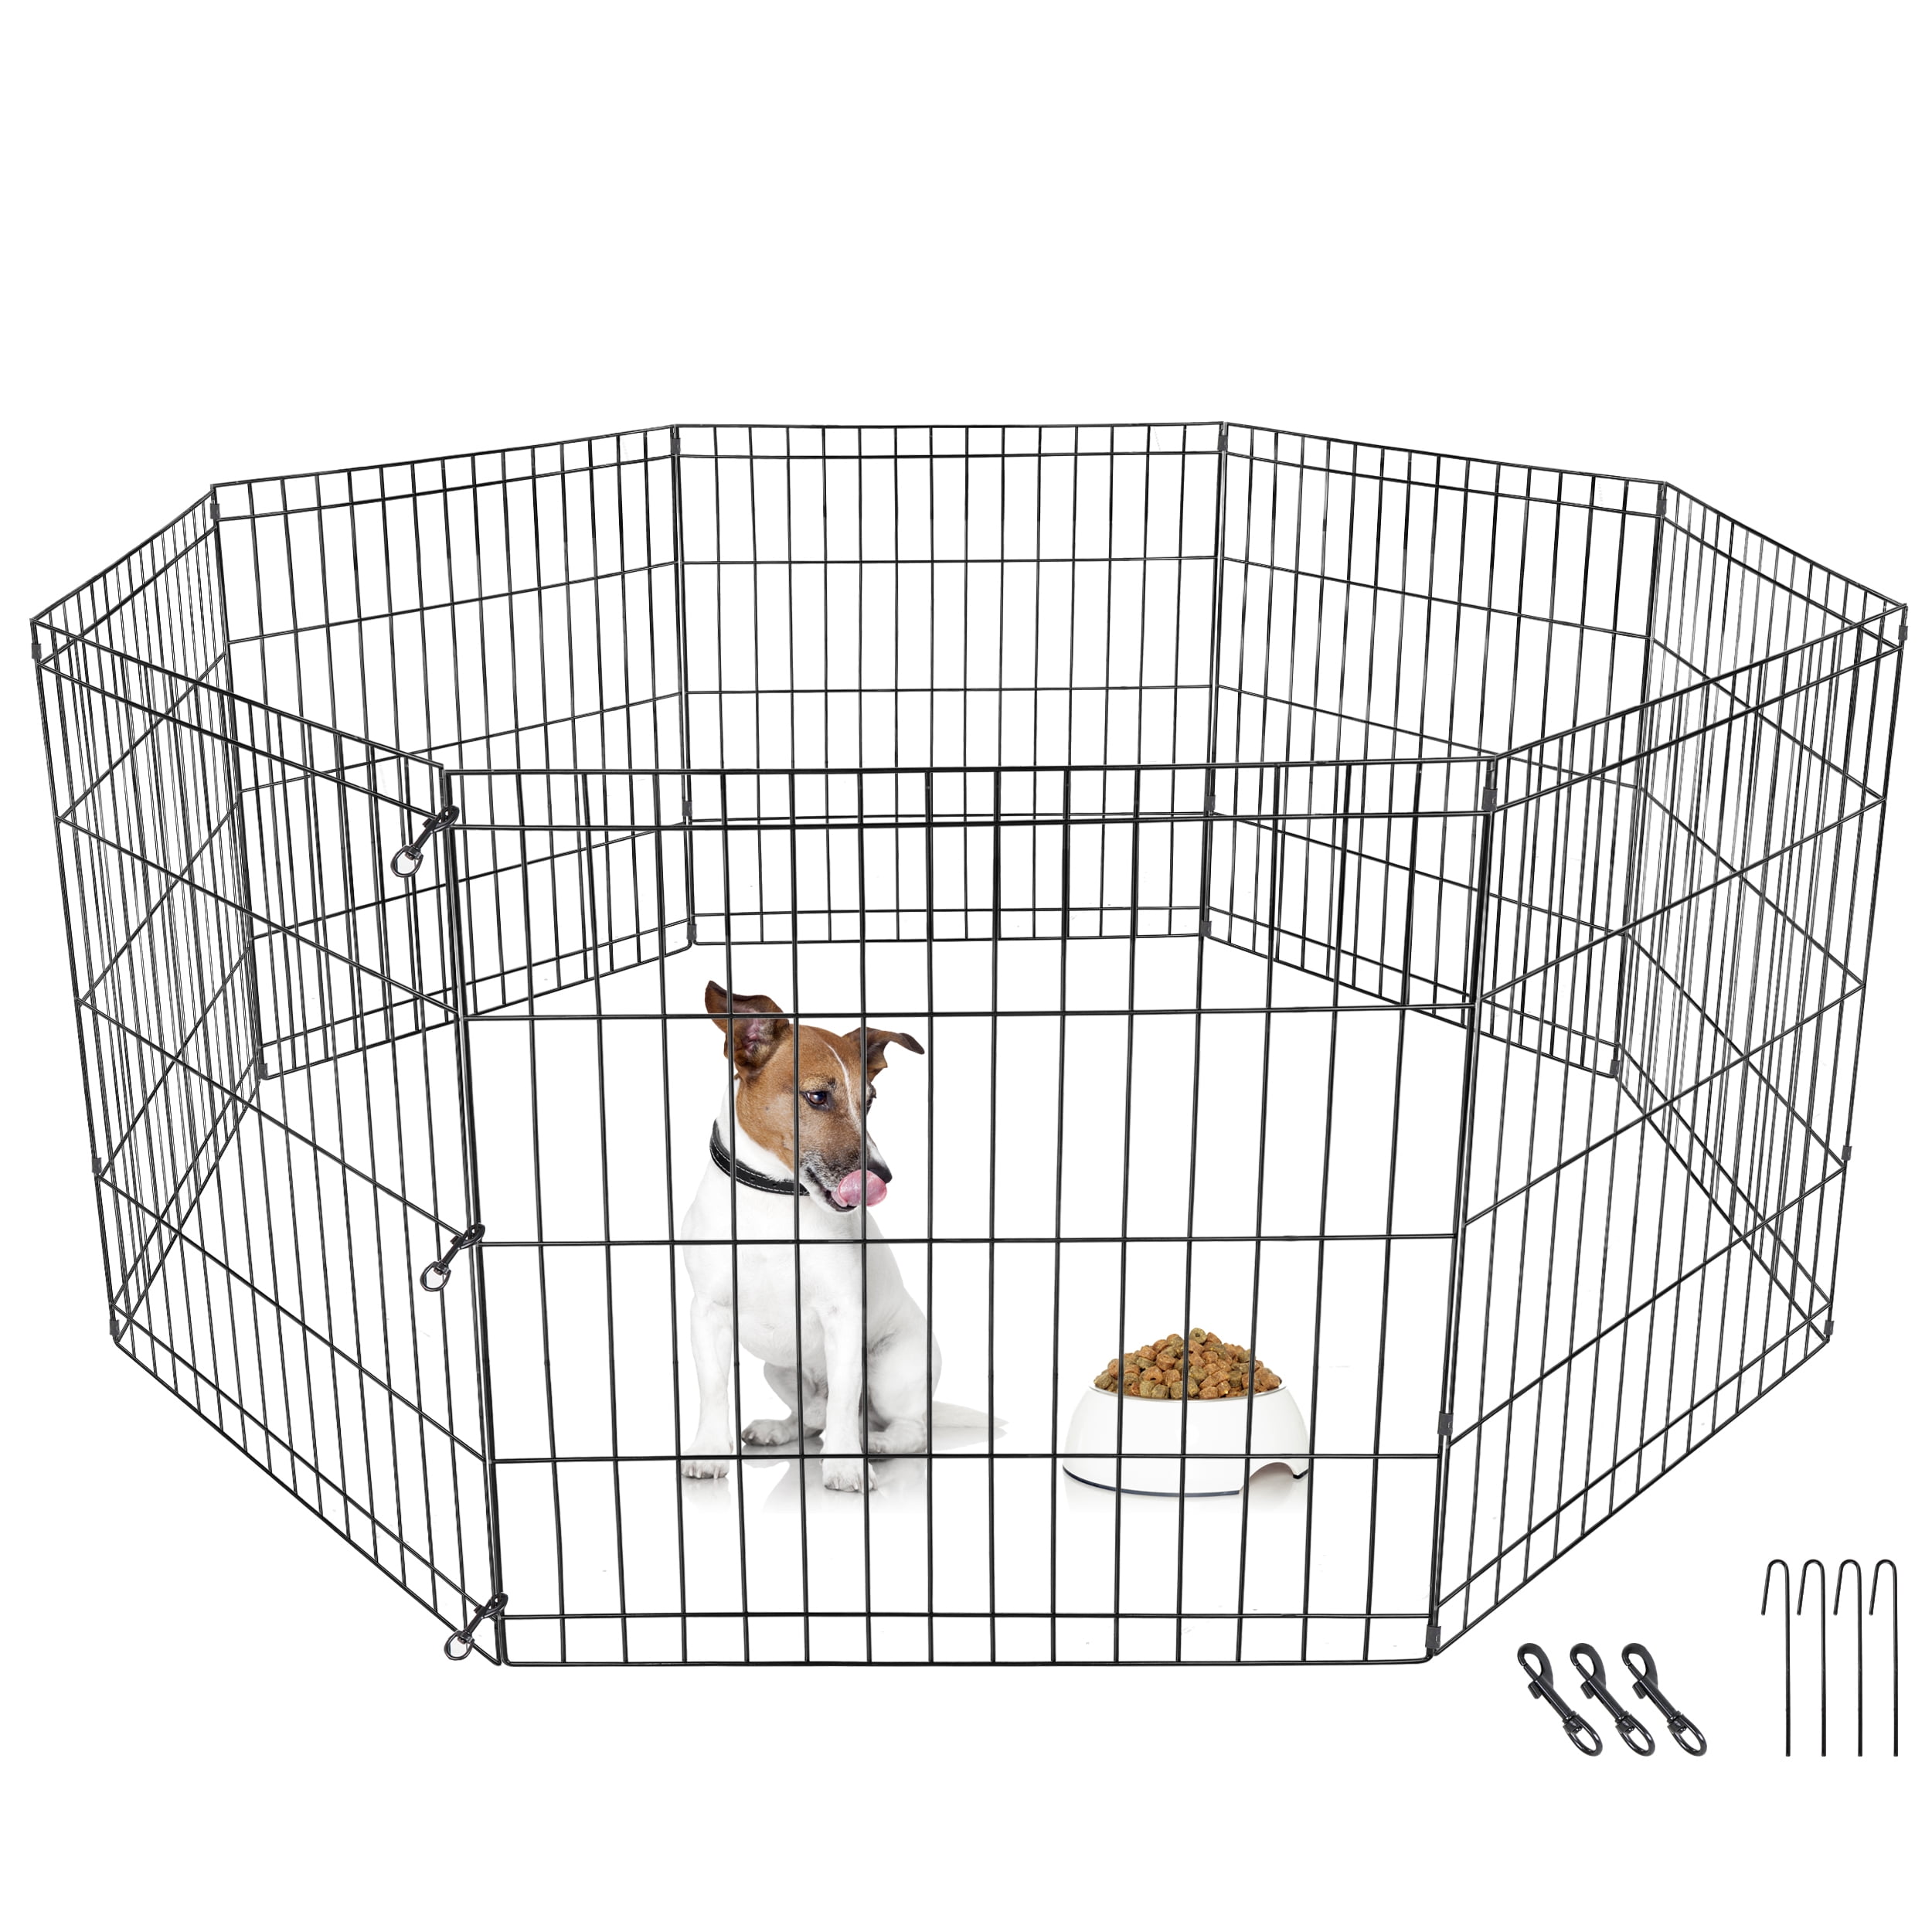 Black Shipped from US Foldable Metal Pet Exercise Dog Playpen Fence Decorative Garden Fence Metal Dog Kennel Exercise Play Yard Cage 16 Panels 